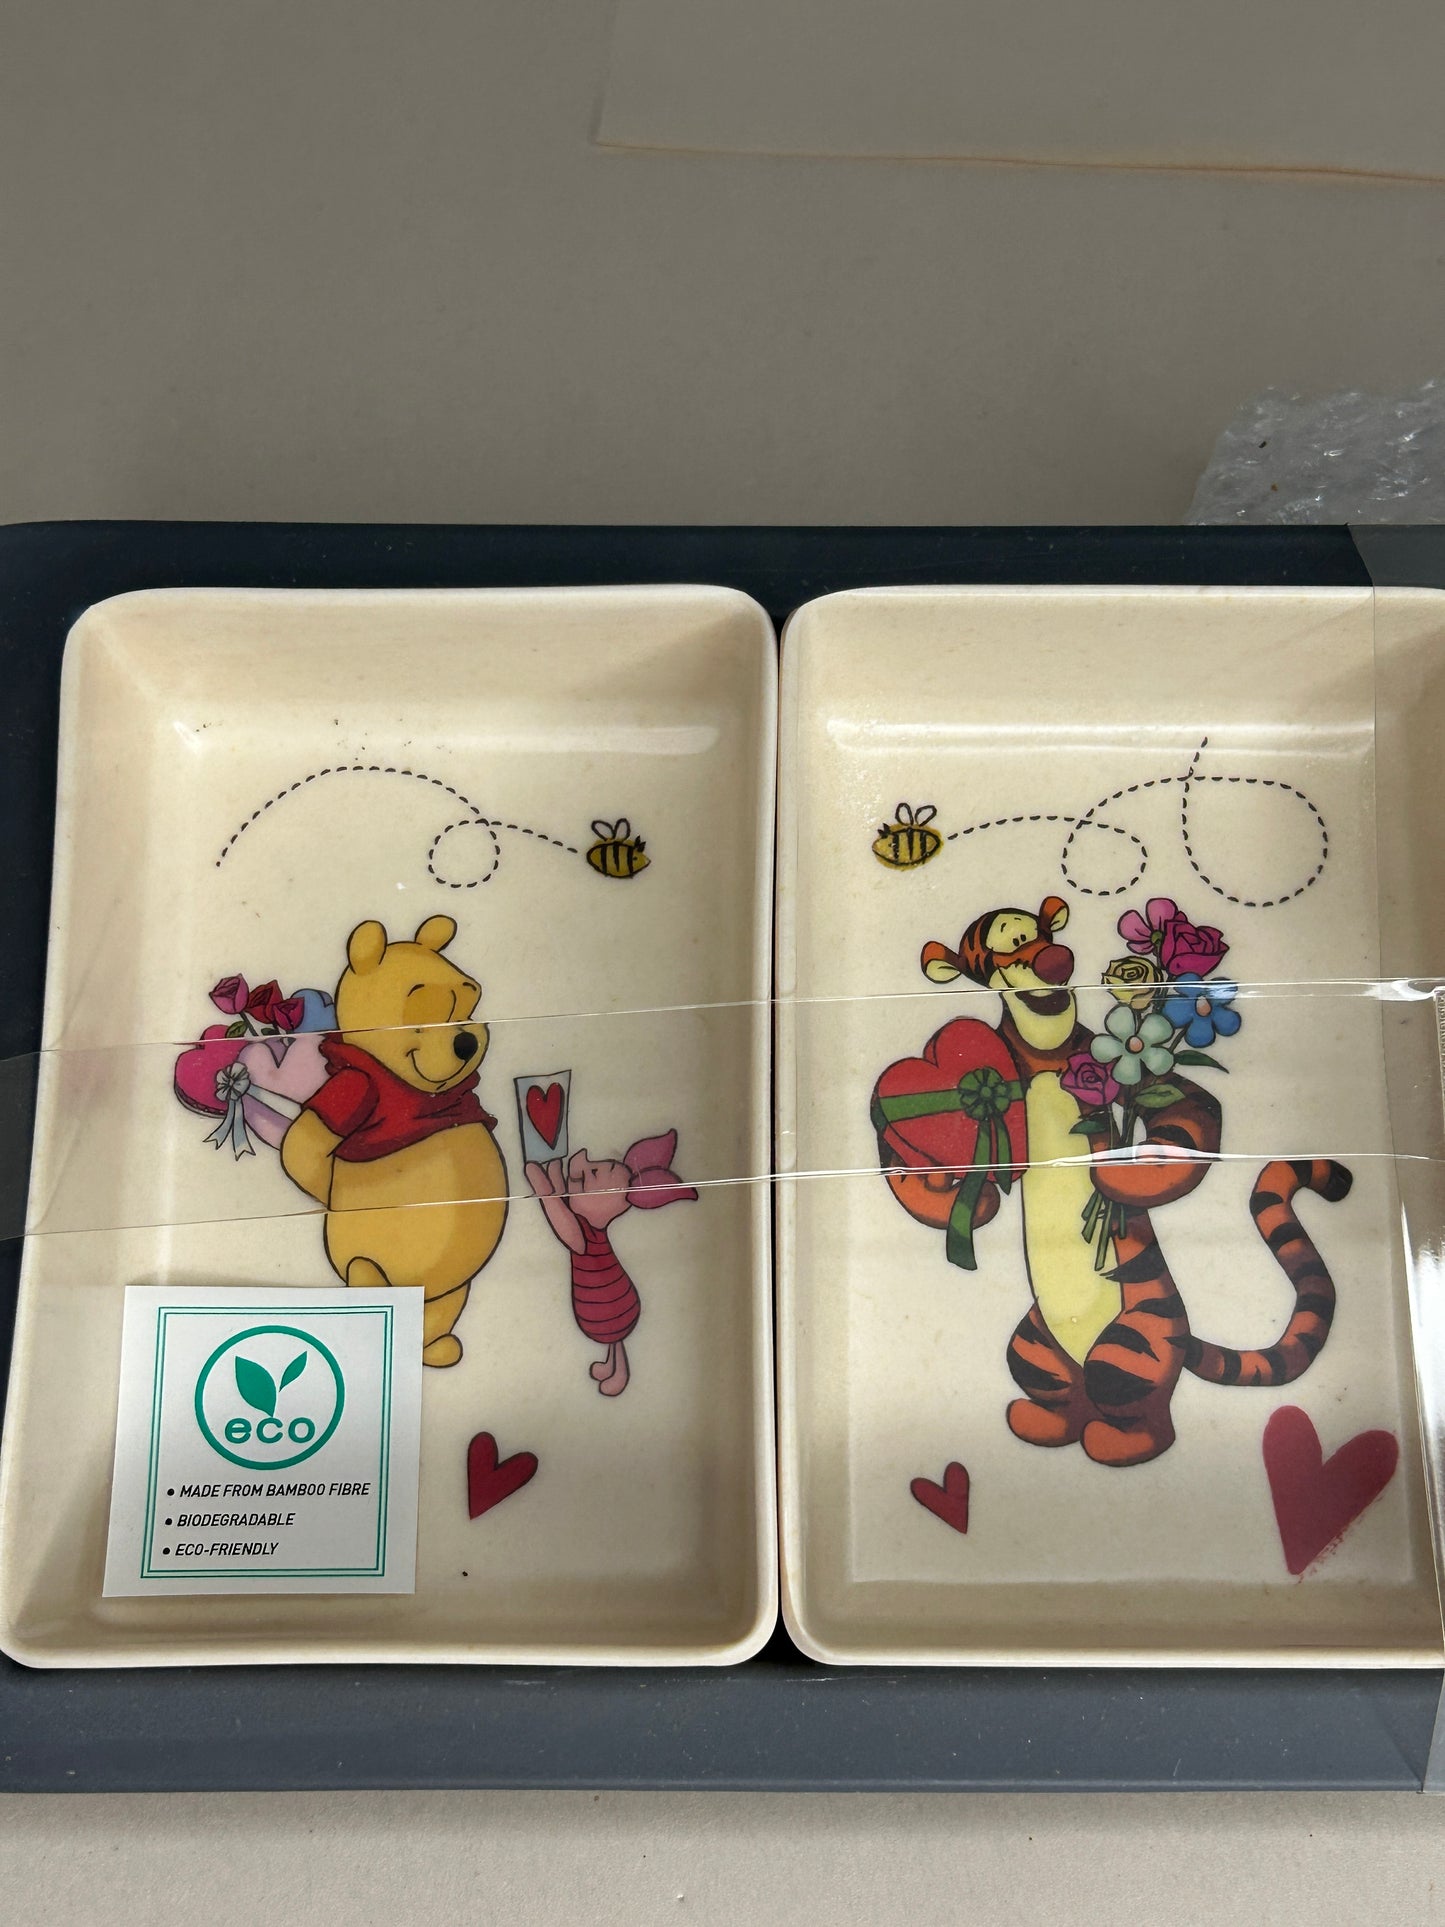 NIP Disney Pooh & Friends Four Section Tray Made of Eco Friendly Bamboo